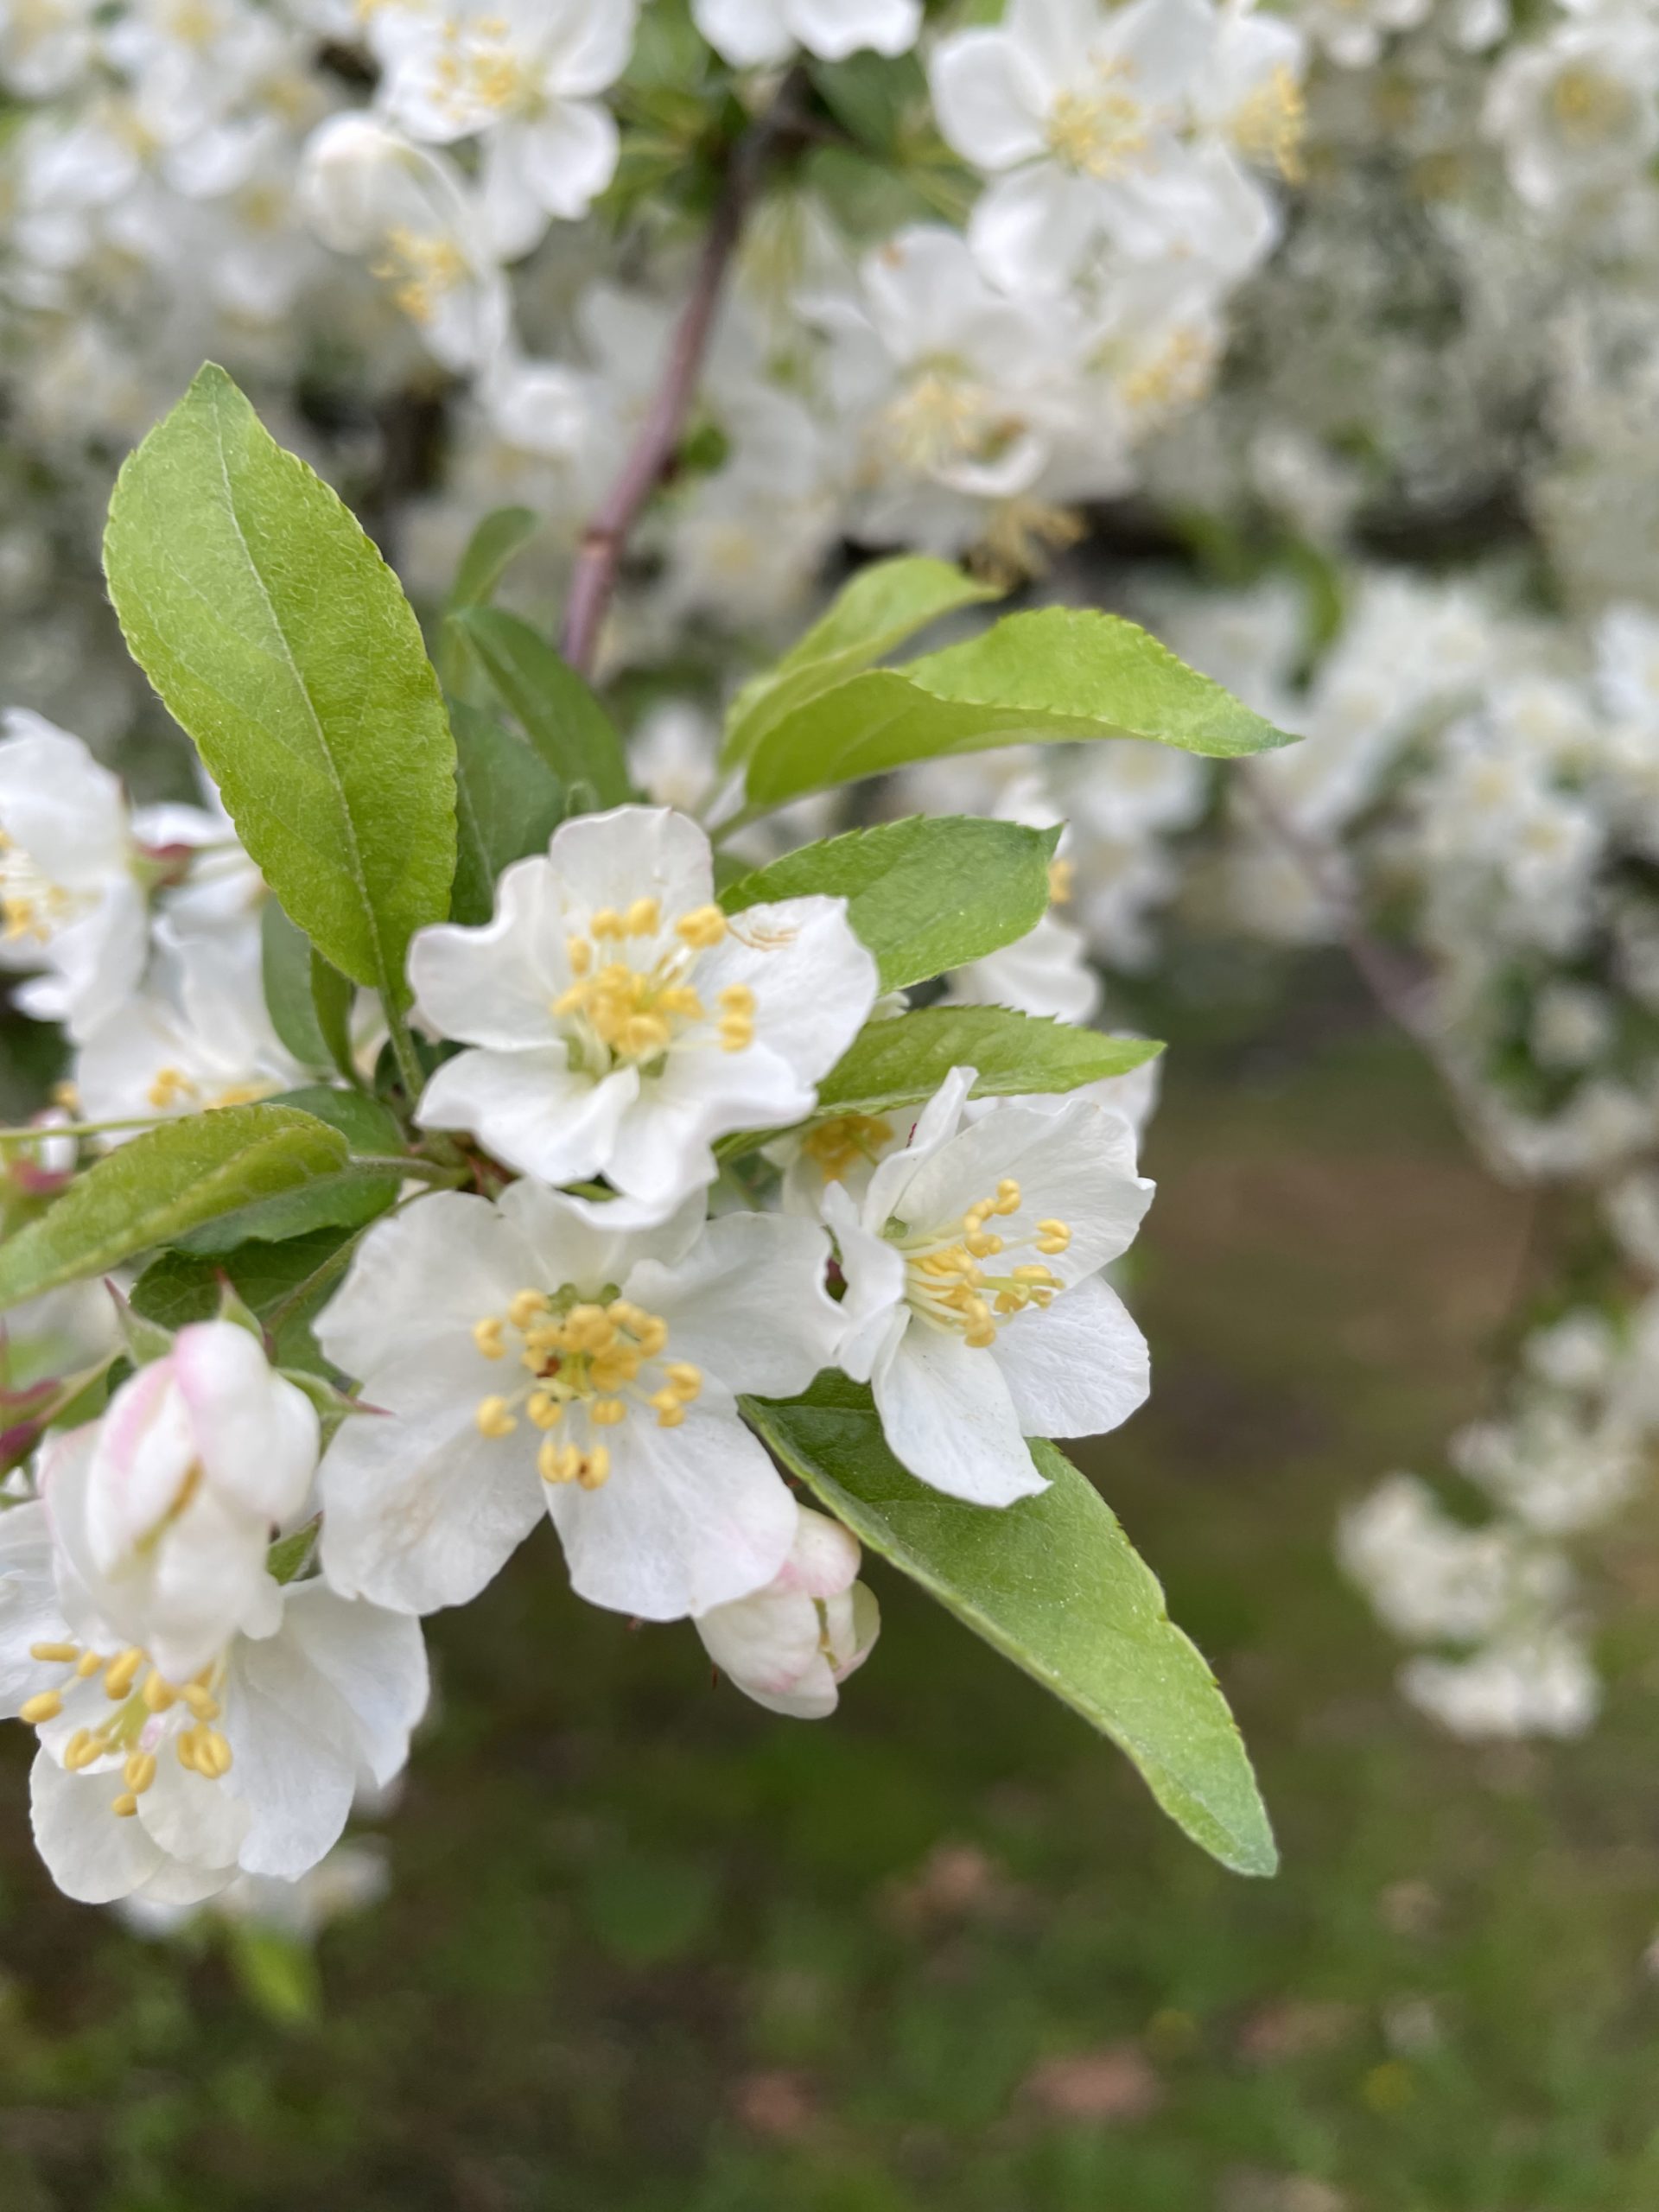 Small white flowers of the Apple Tree at Marywood University